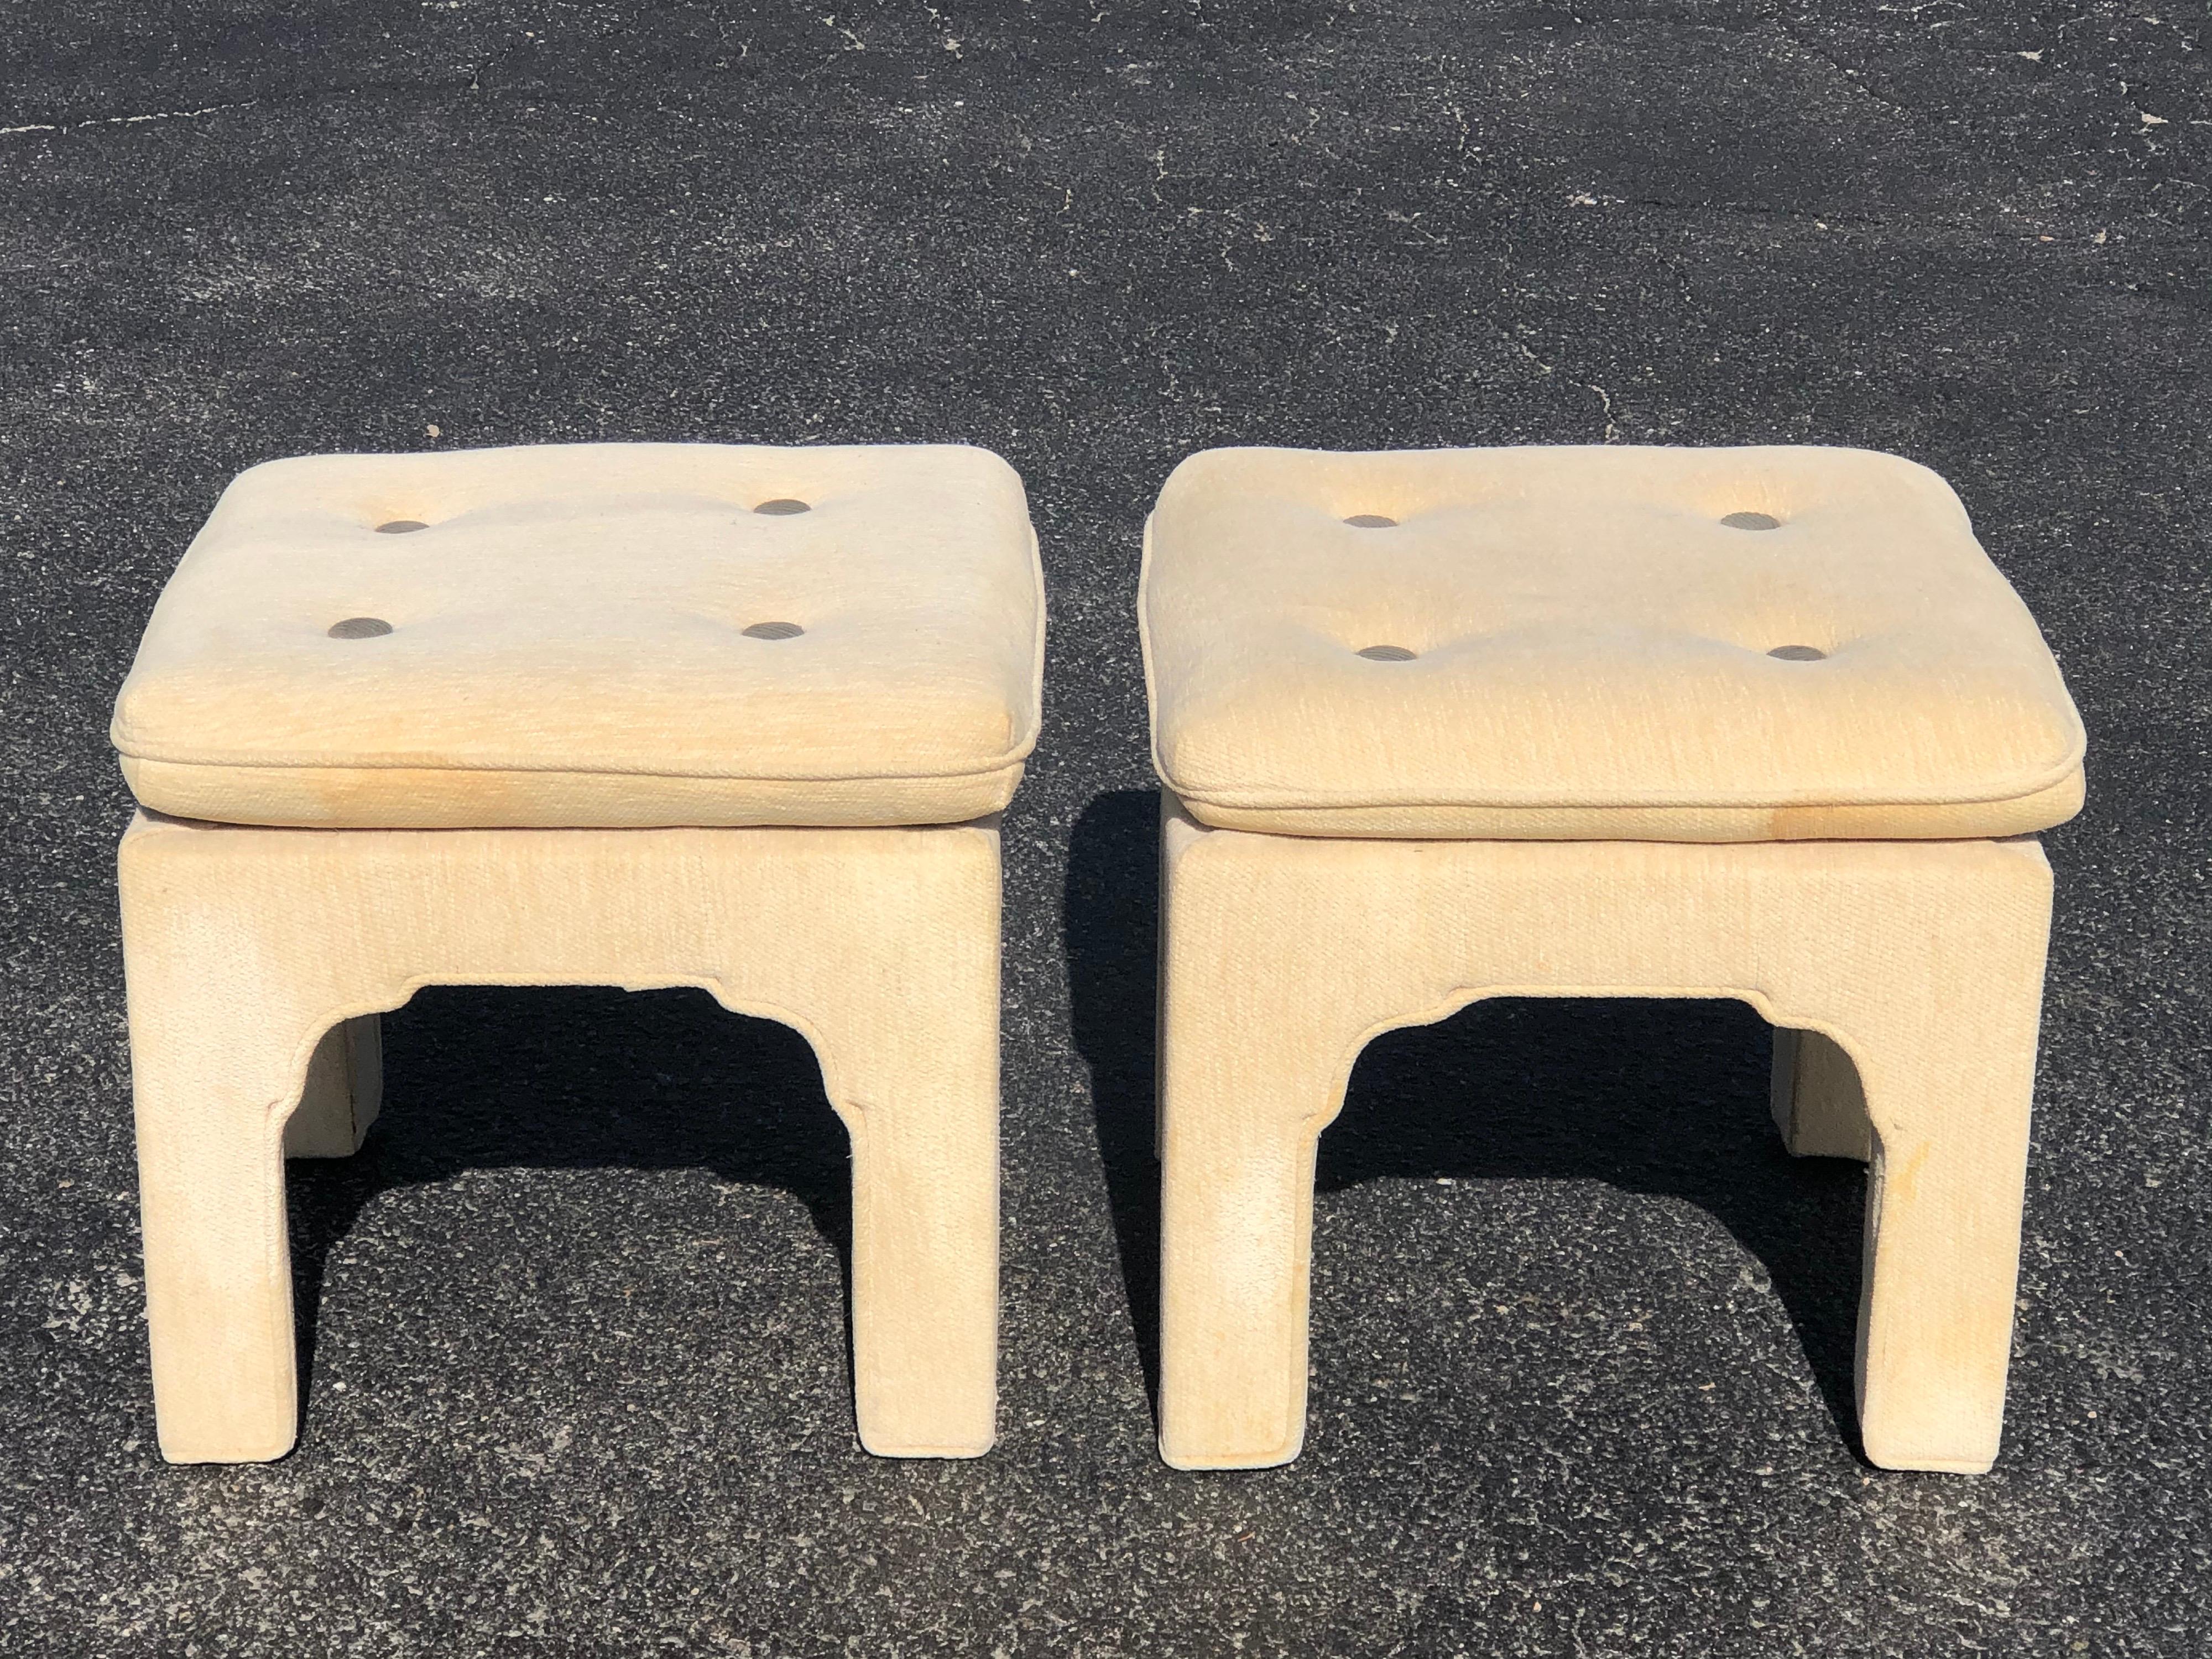 Pair of custom pillow top upholstered ottomans. Covered in a cream chennile with an olive green upholstered button. Nice two tone effect. Perfect for under a console table or at thte foot of a bed. These can parcel ship for $69 domestically.